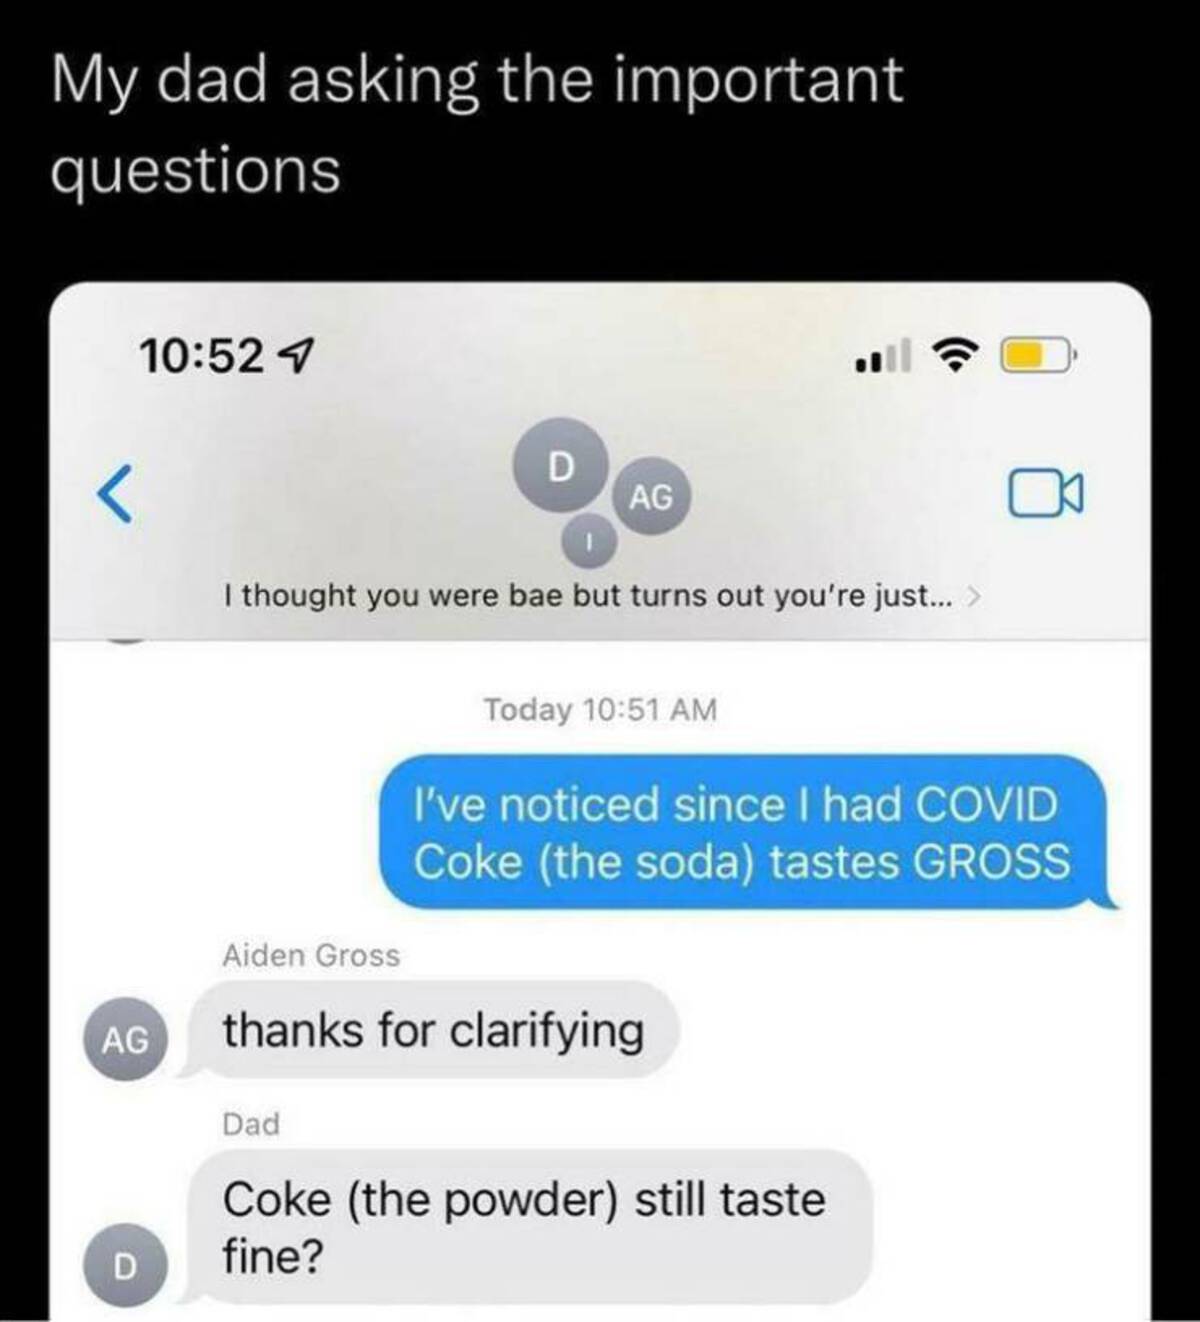 screenshot - My dad asking the important questions Ag D 1 D Ag I thought you were bae but turns out you're just... > Aiden Gross Today I've noticed since I had Covid Coke the soda tastes Gross thanks for clarifying Dad Coke the powder still taste fine?